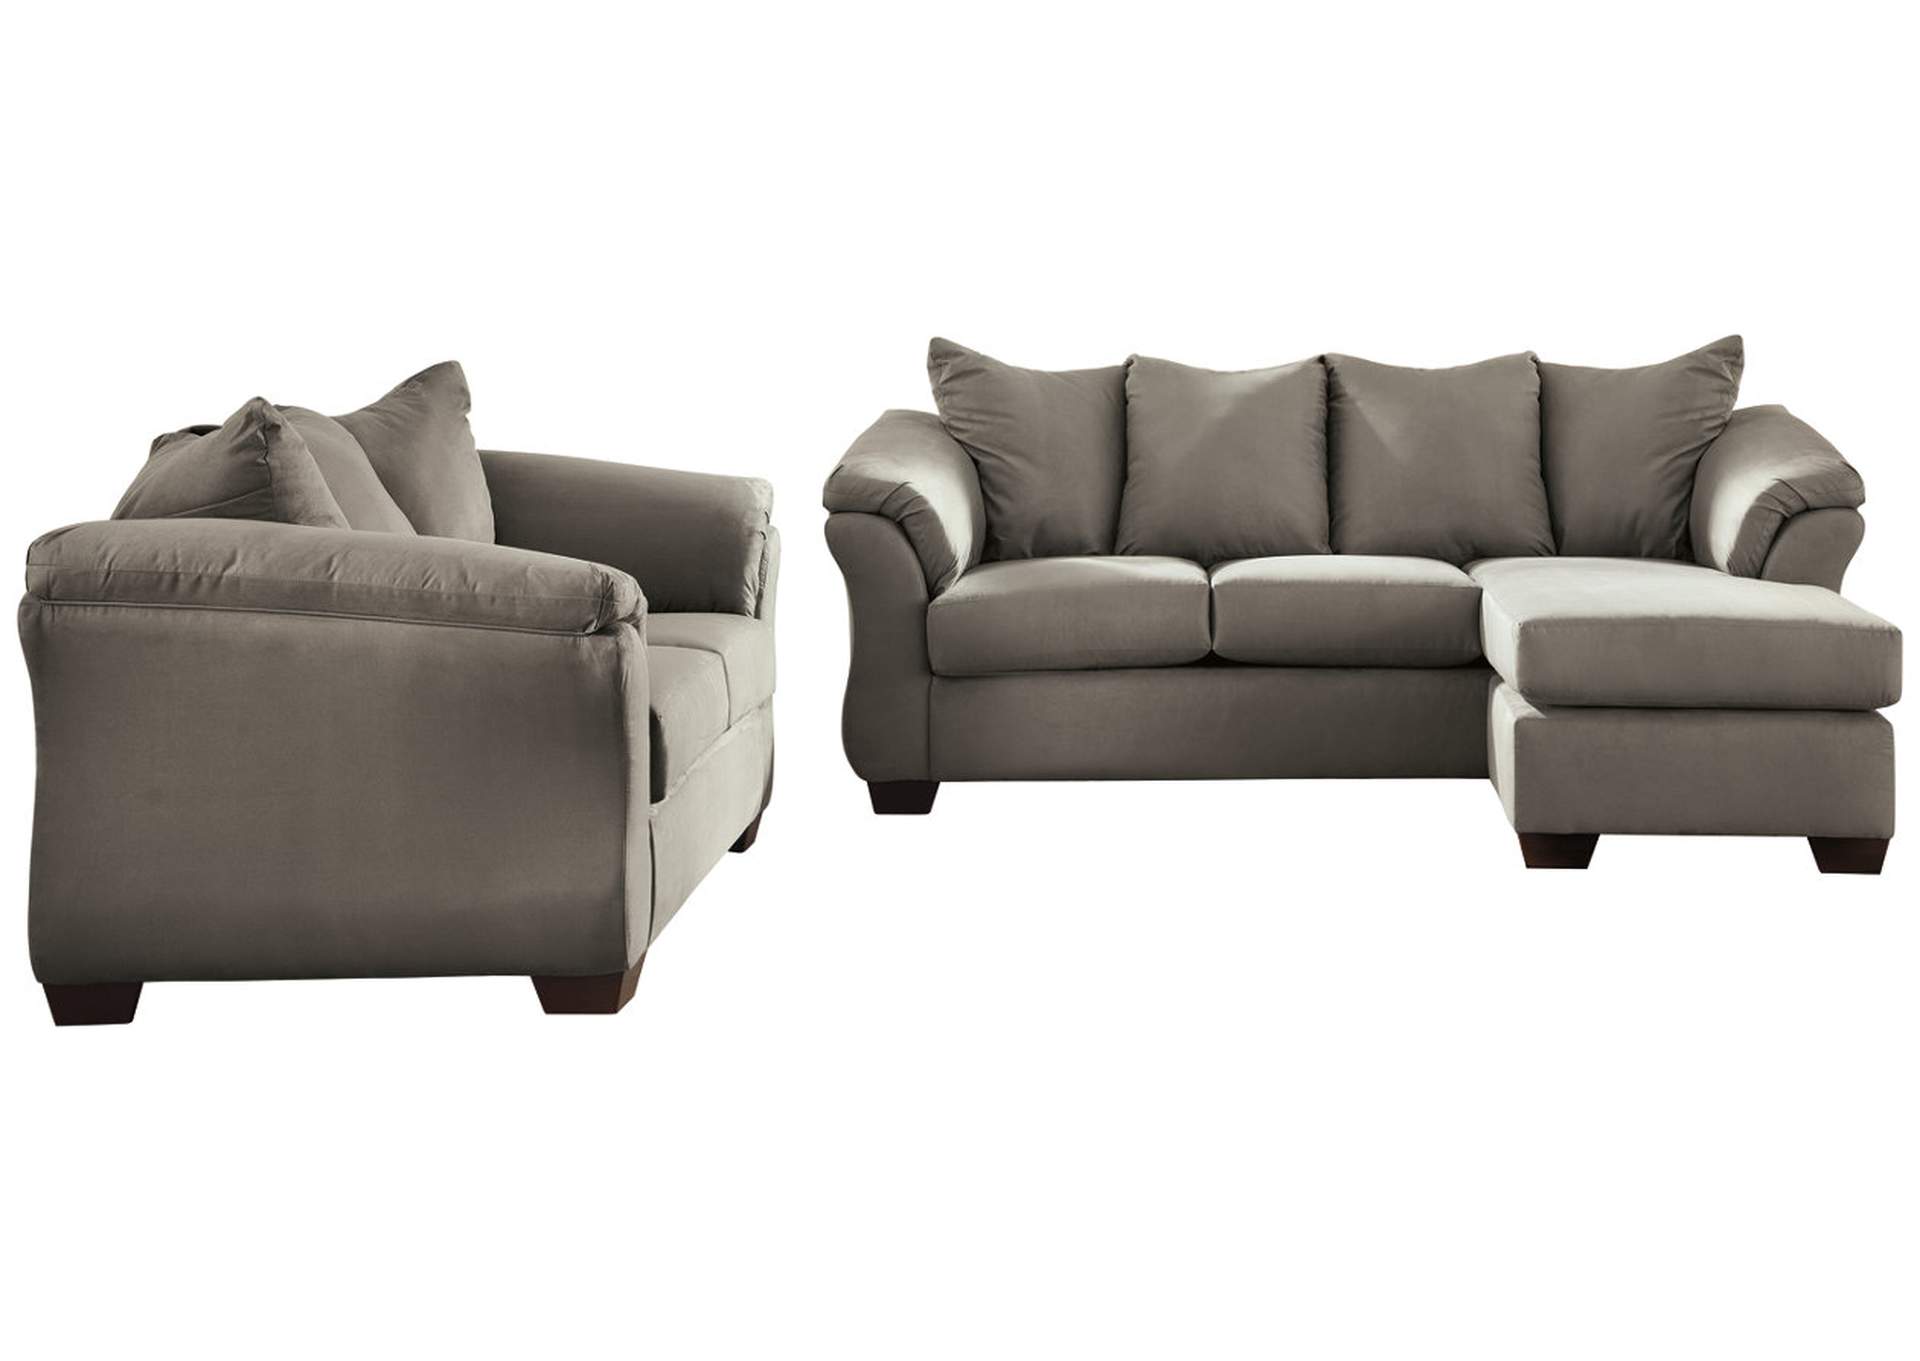 Darcy Sofa Chaise And Loveseat Home